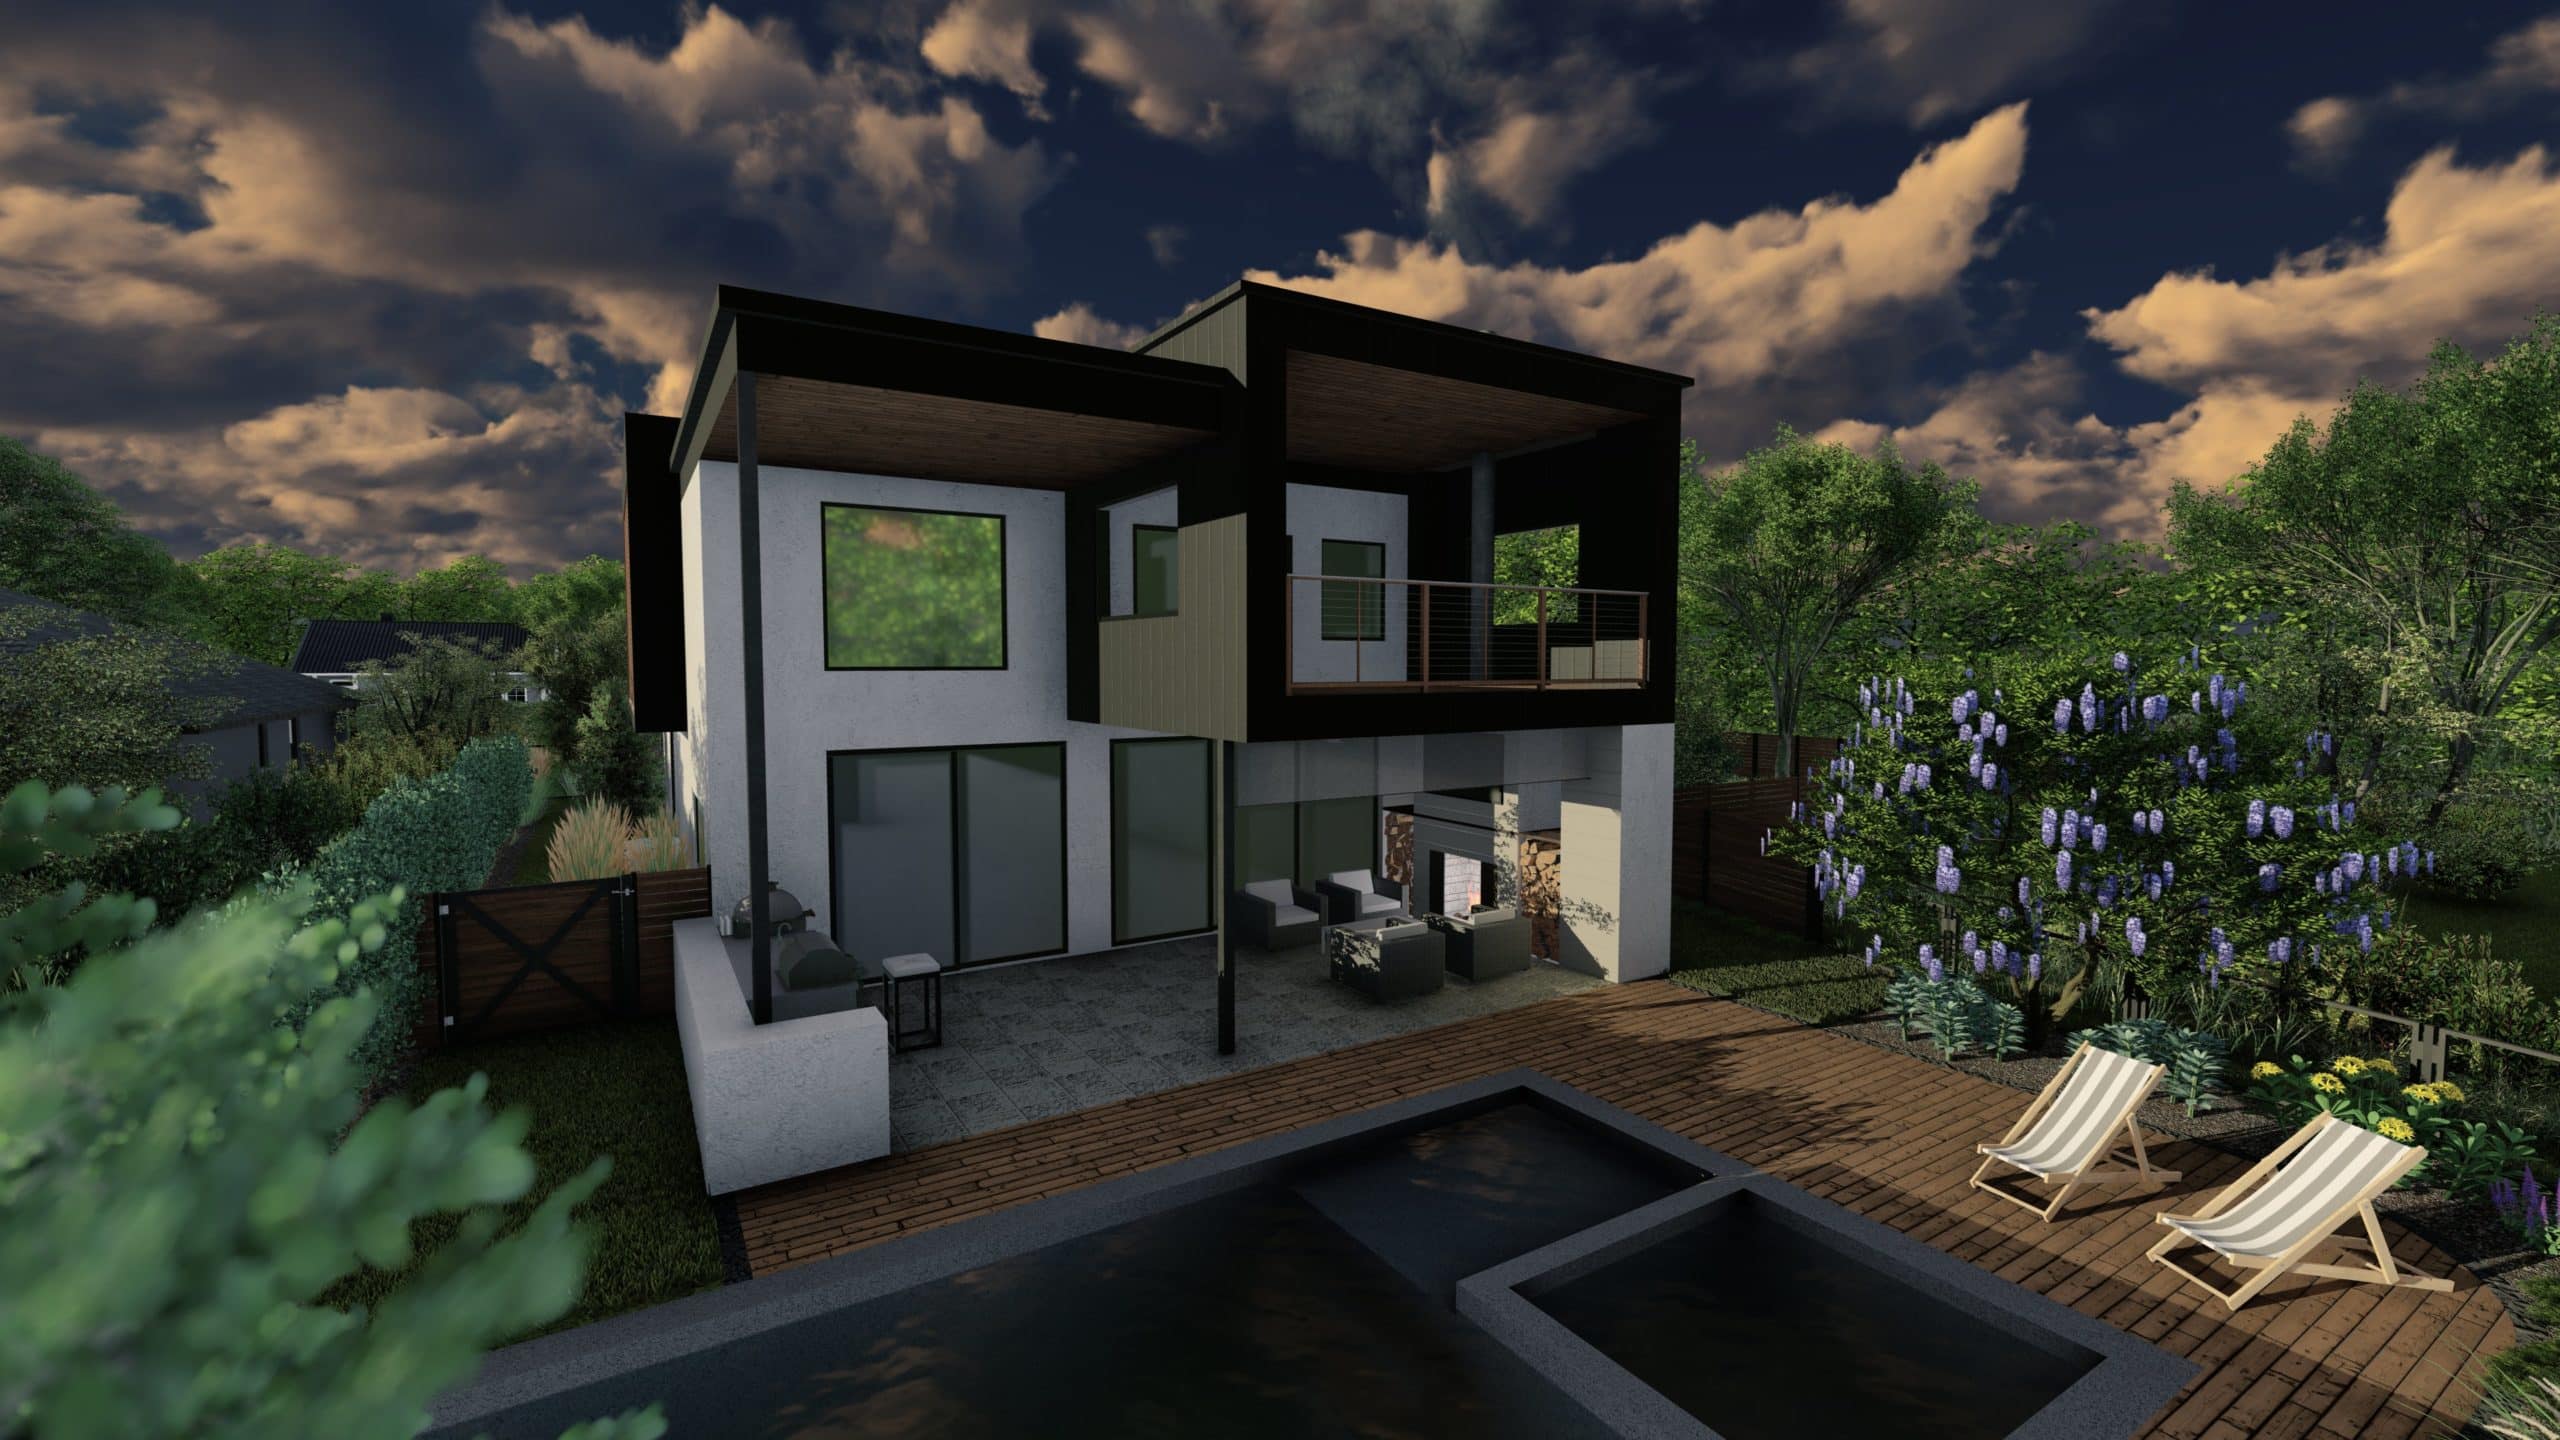 3D design render of backyard for modern home with pool and lounge area